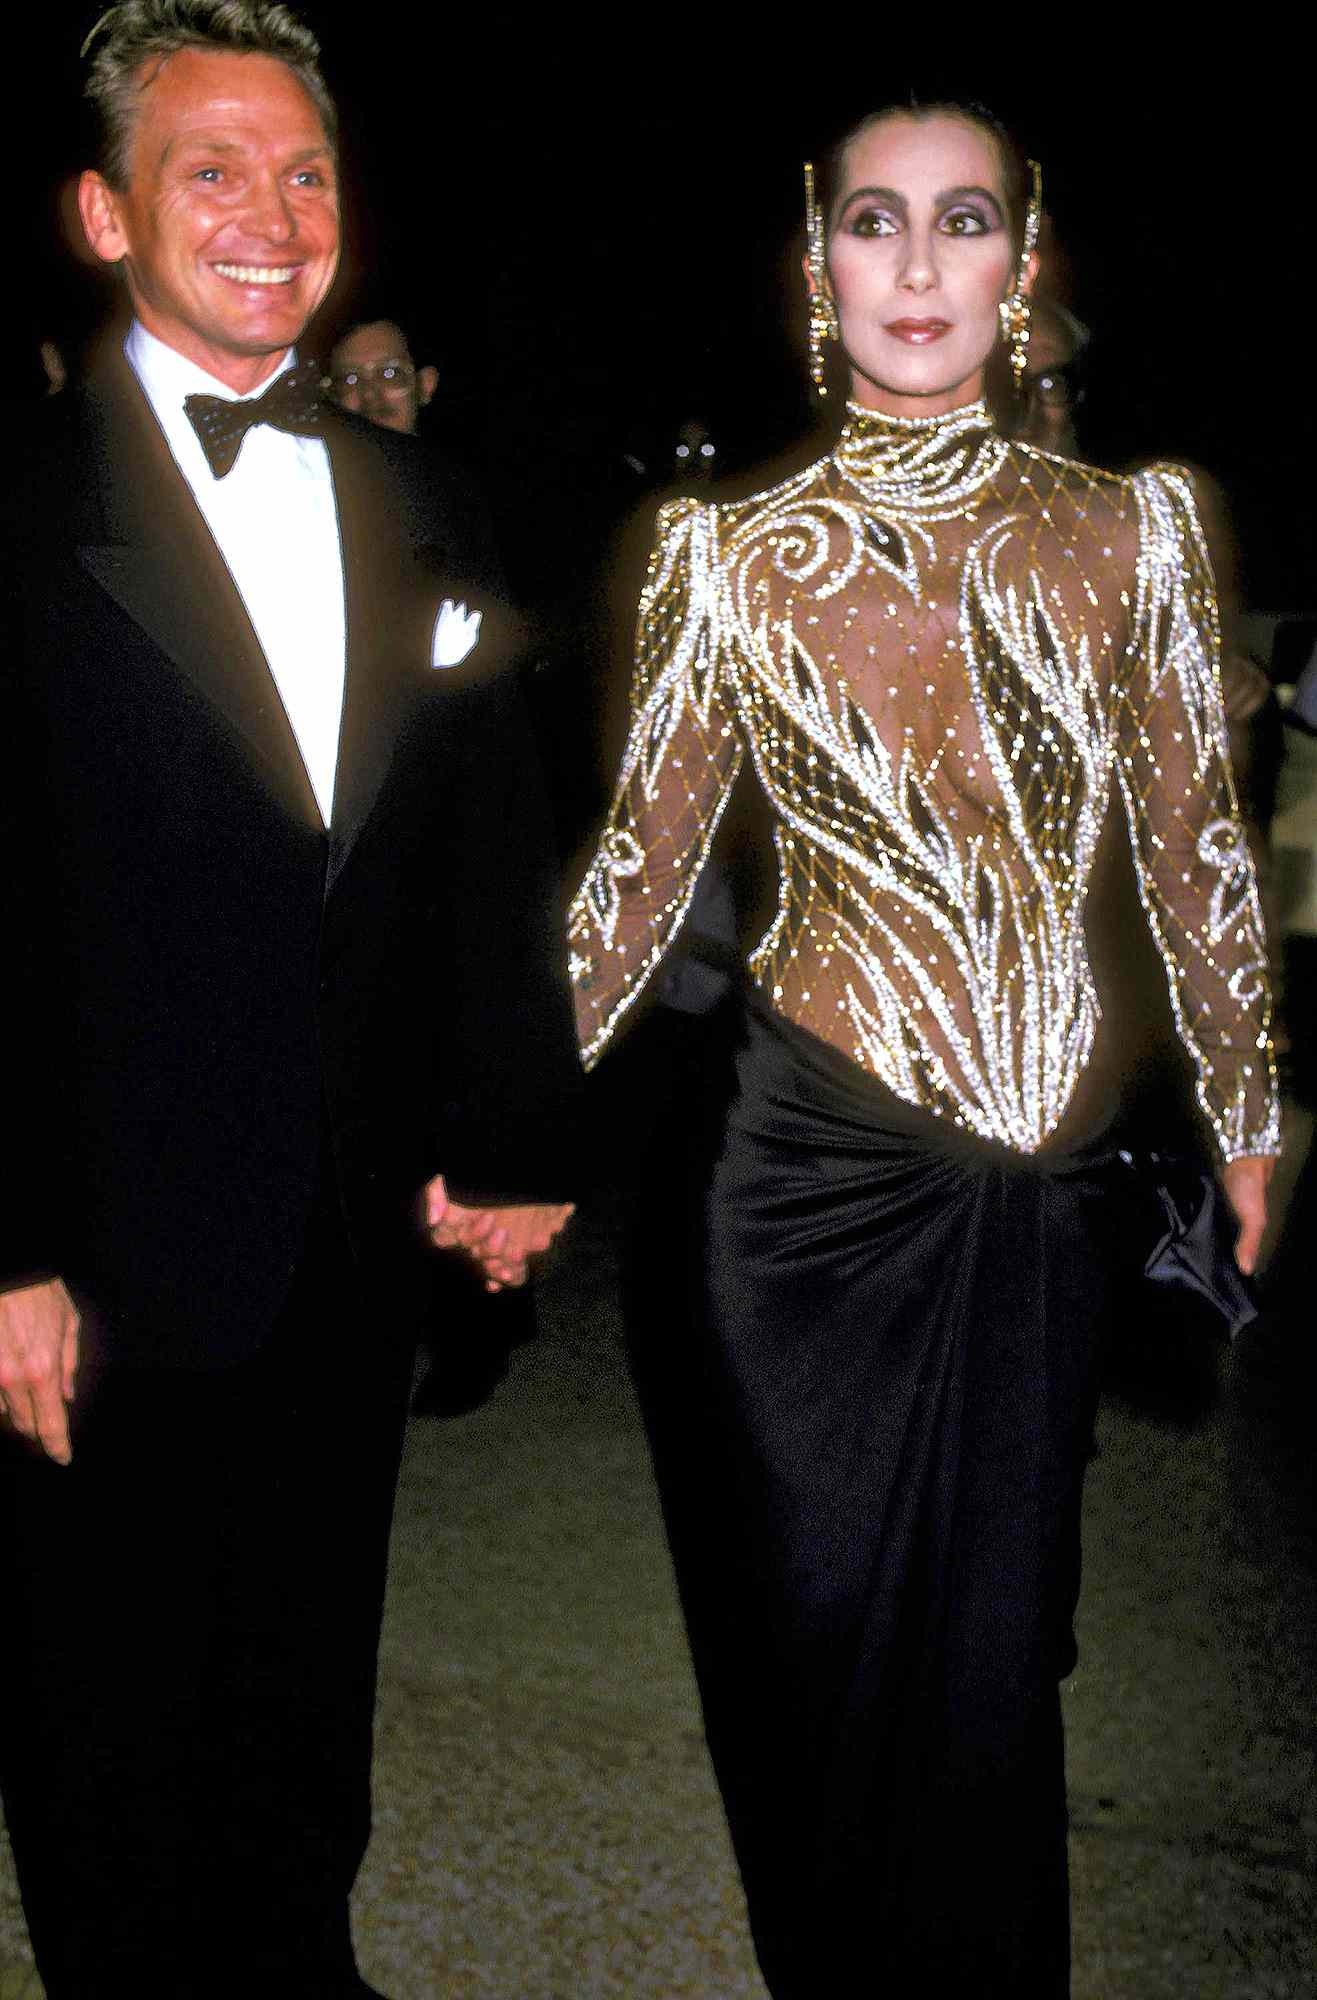 Draped in History Revisiting the Most Memorable Met Gala Themes-Image 2